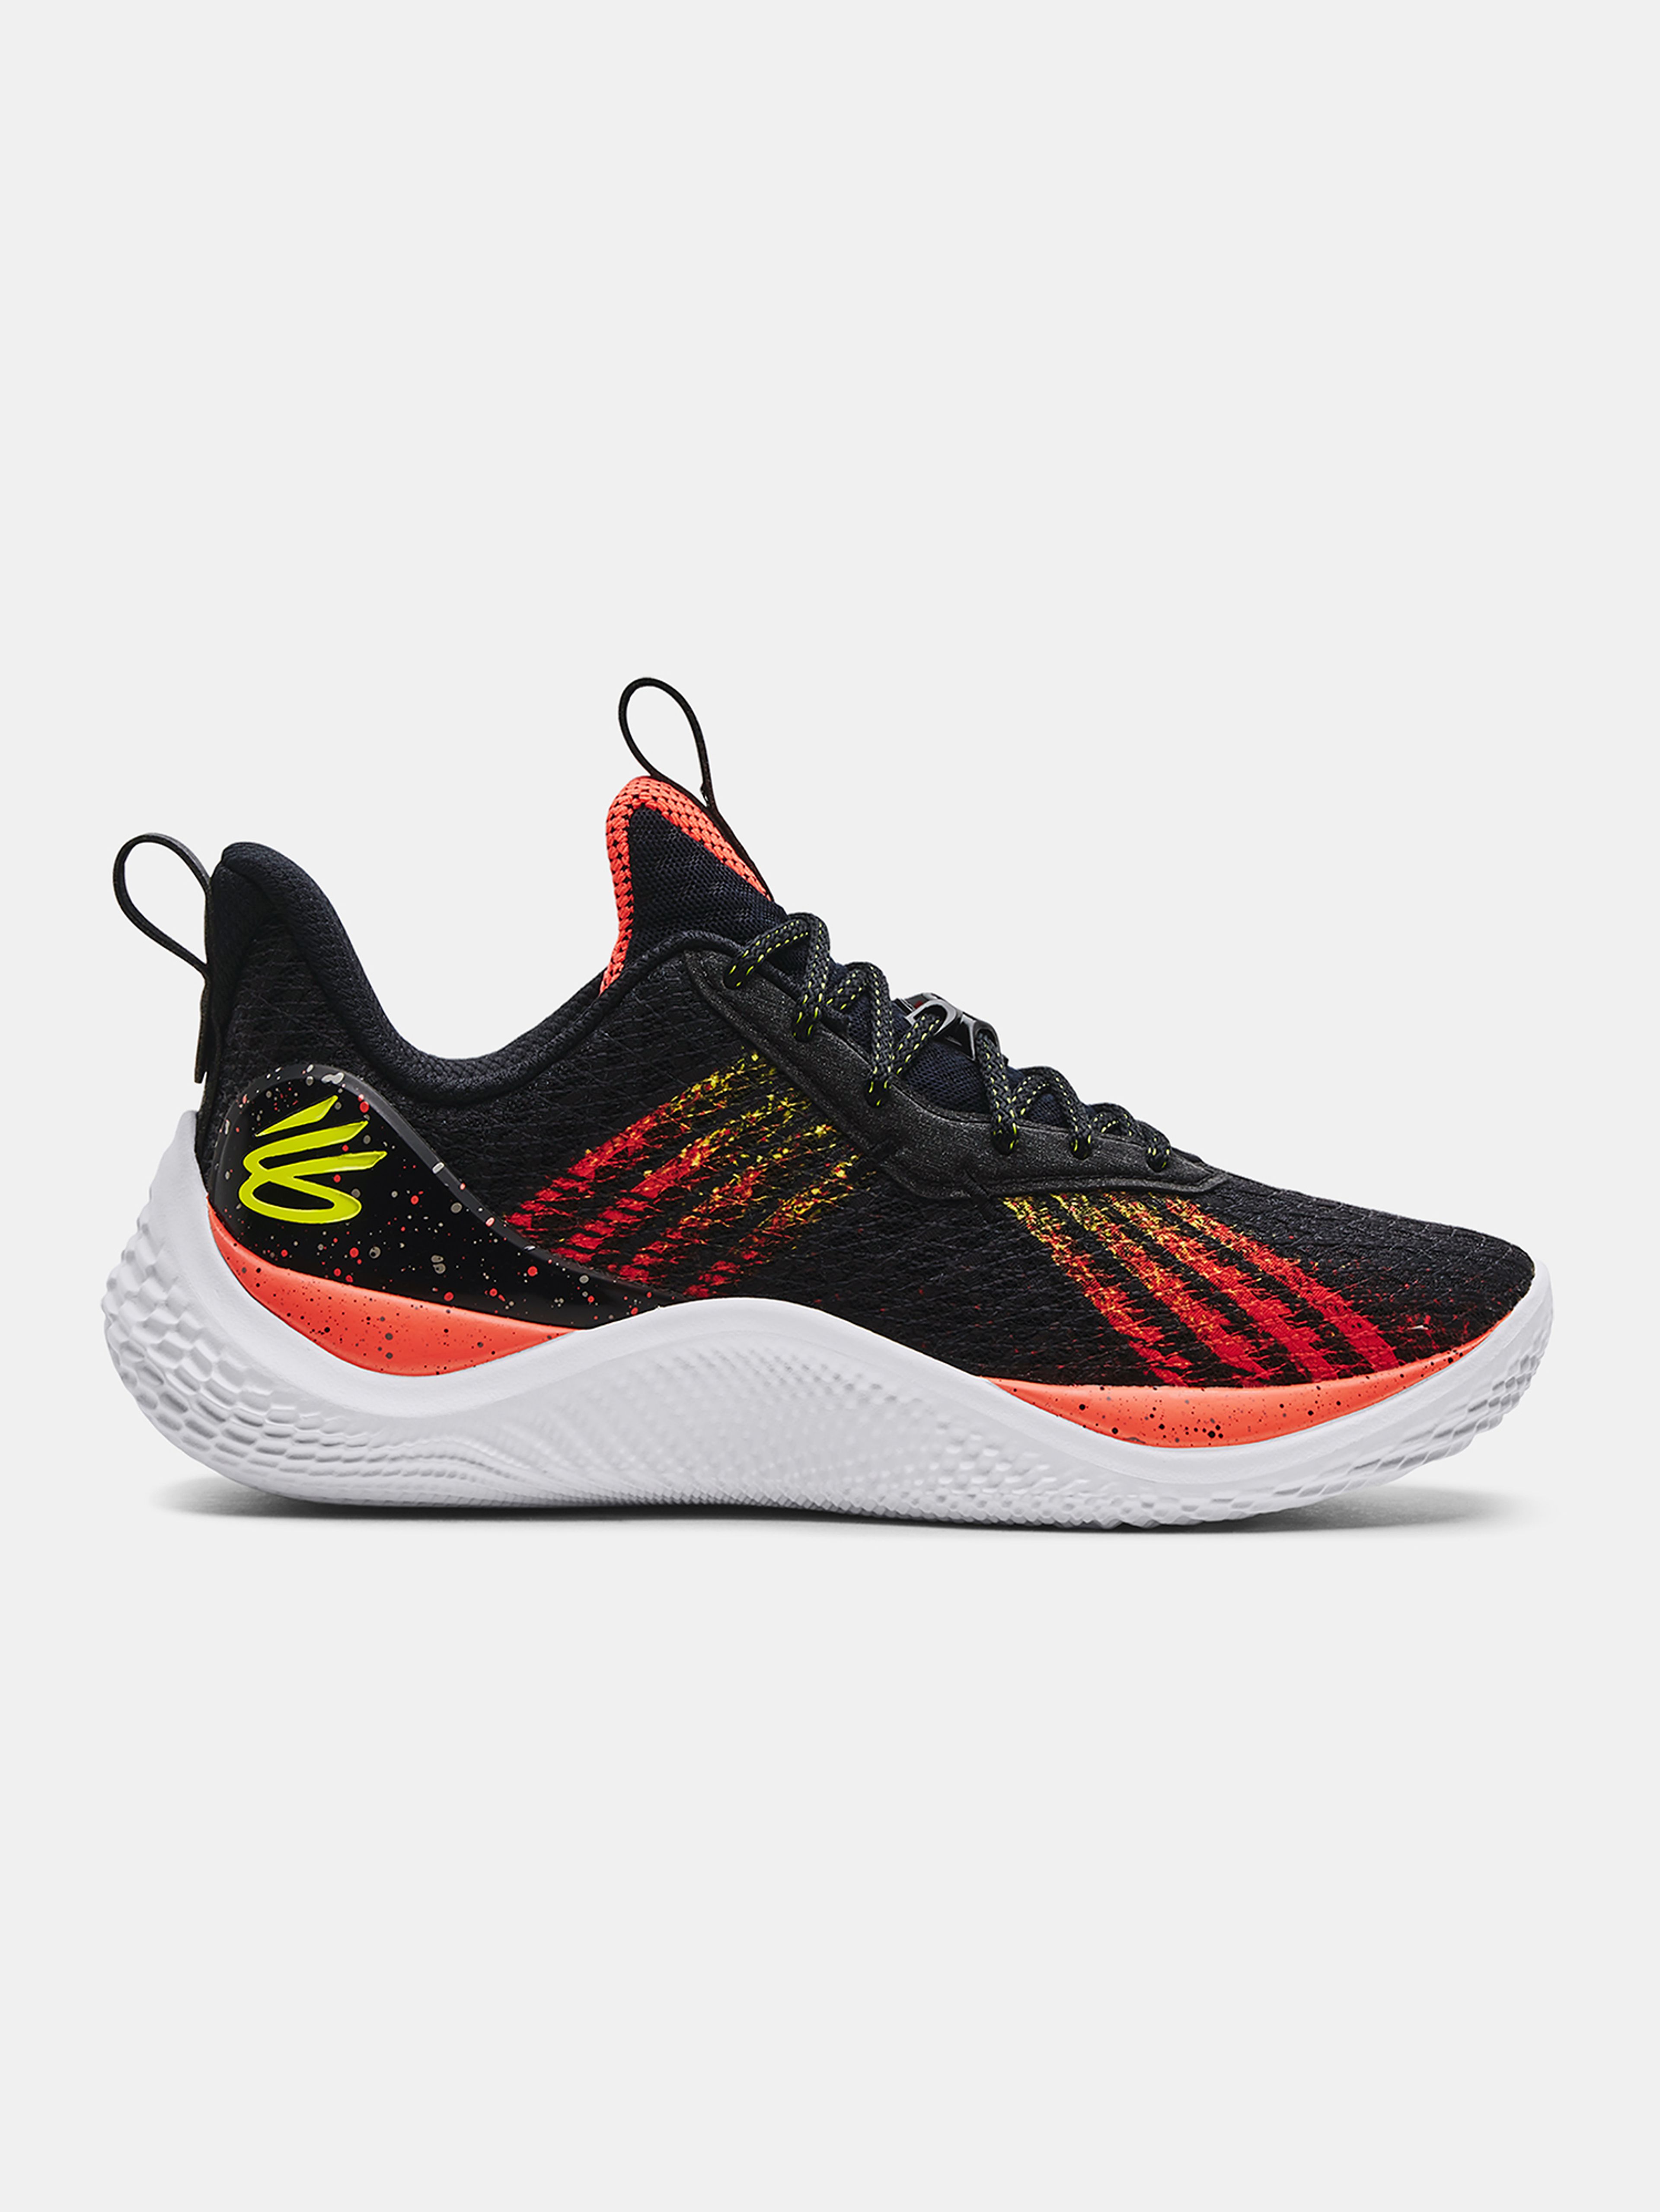 Boty Under Armour CURRY 10-BLK